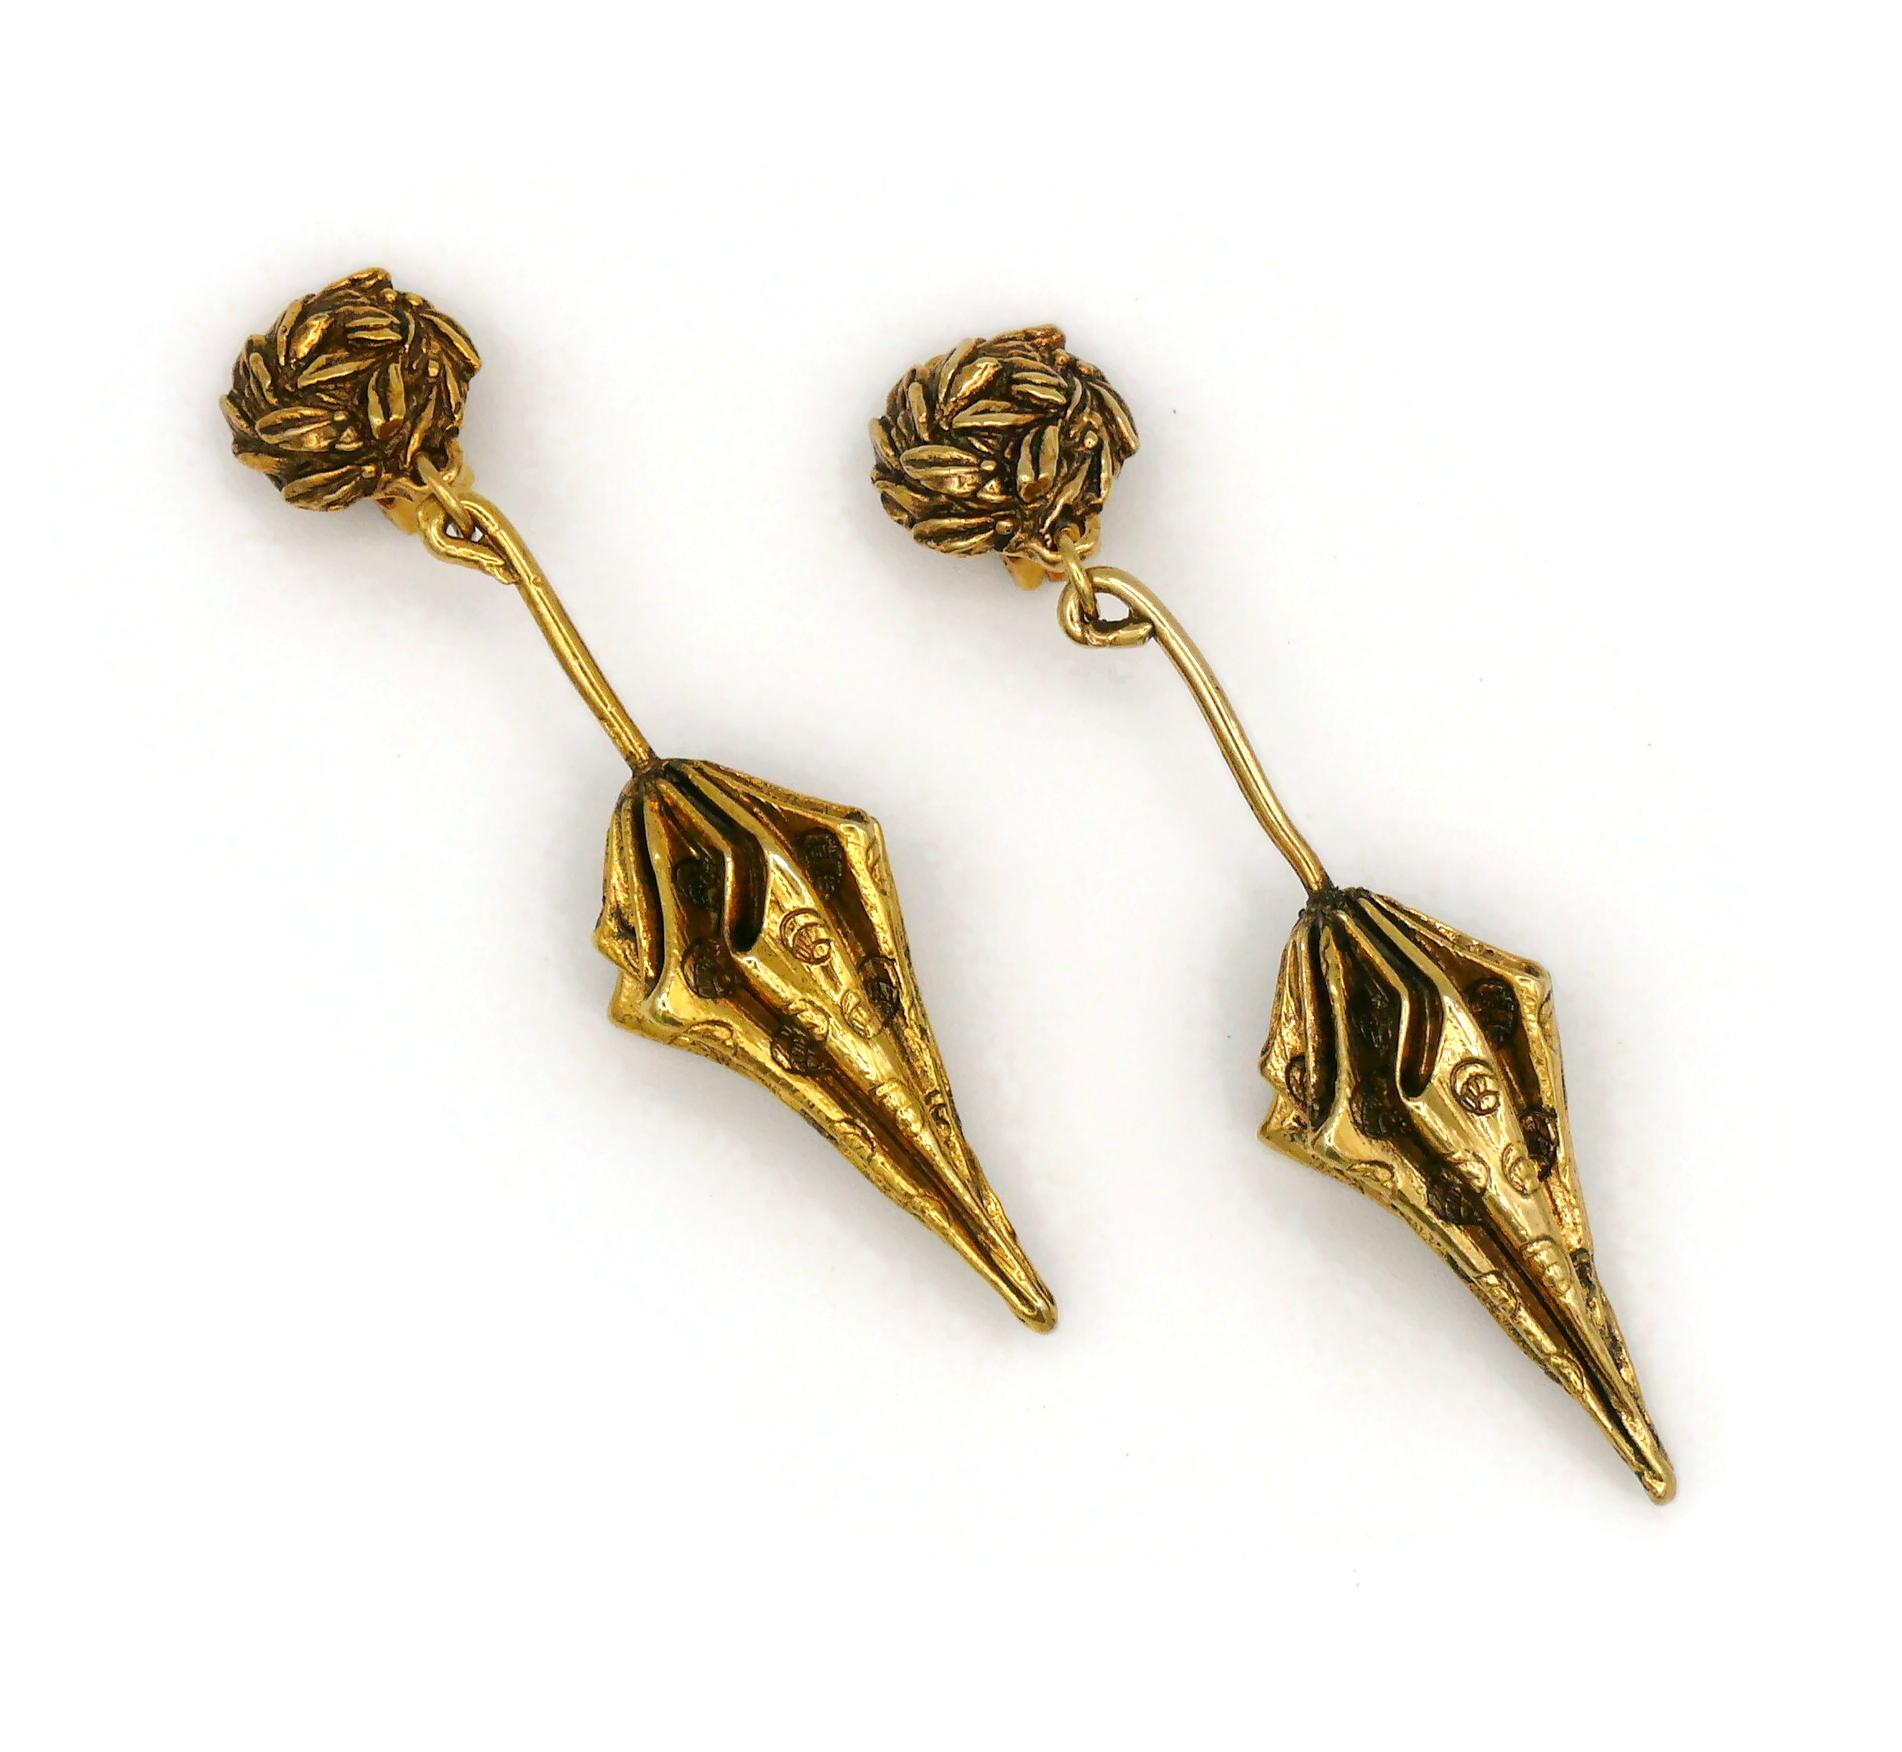 Chantal Thomass (Attributed to) Vintage Umbrella Dangling Earrings In Good Condition For Sale In Nice, FR